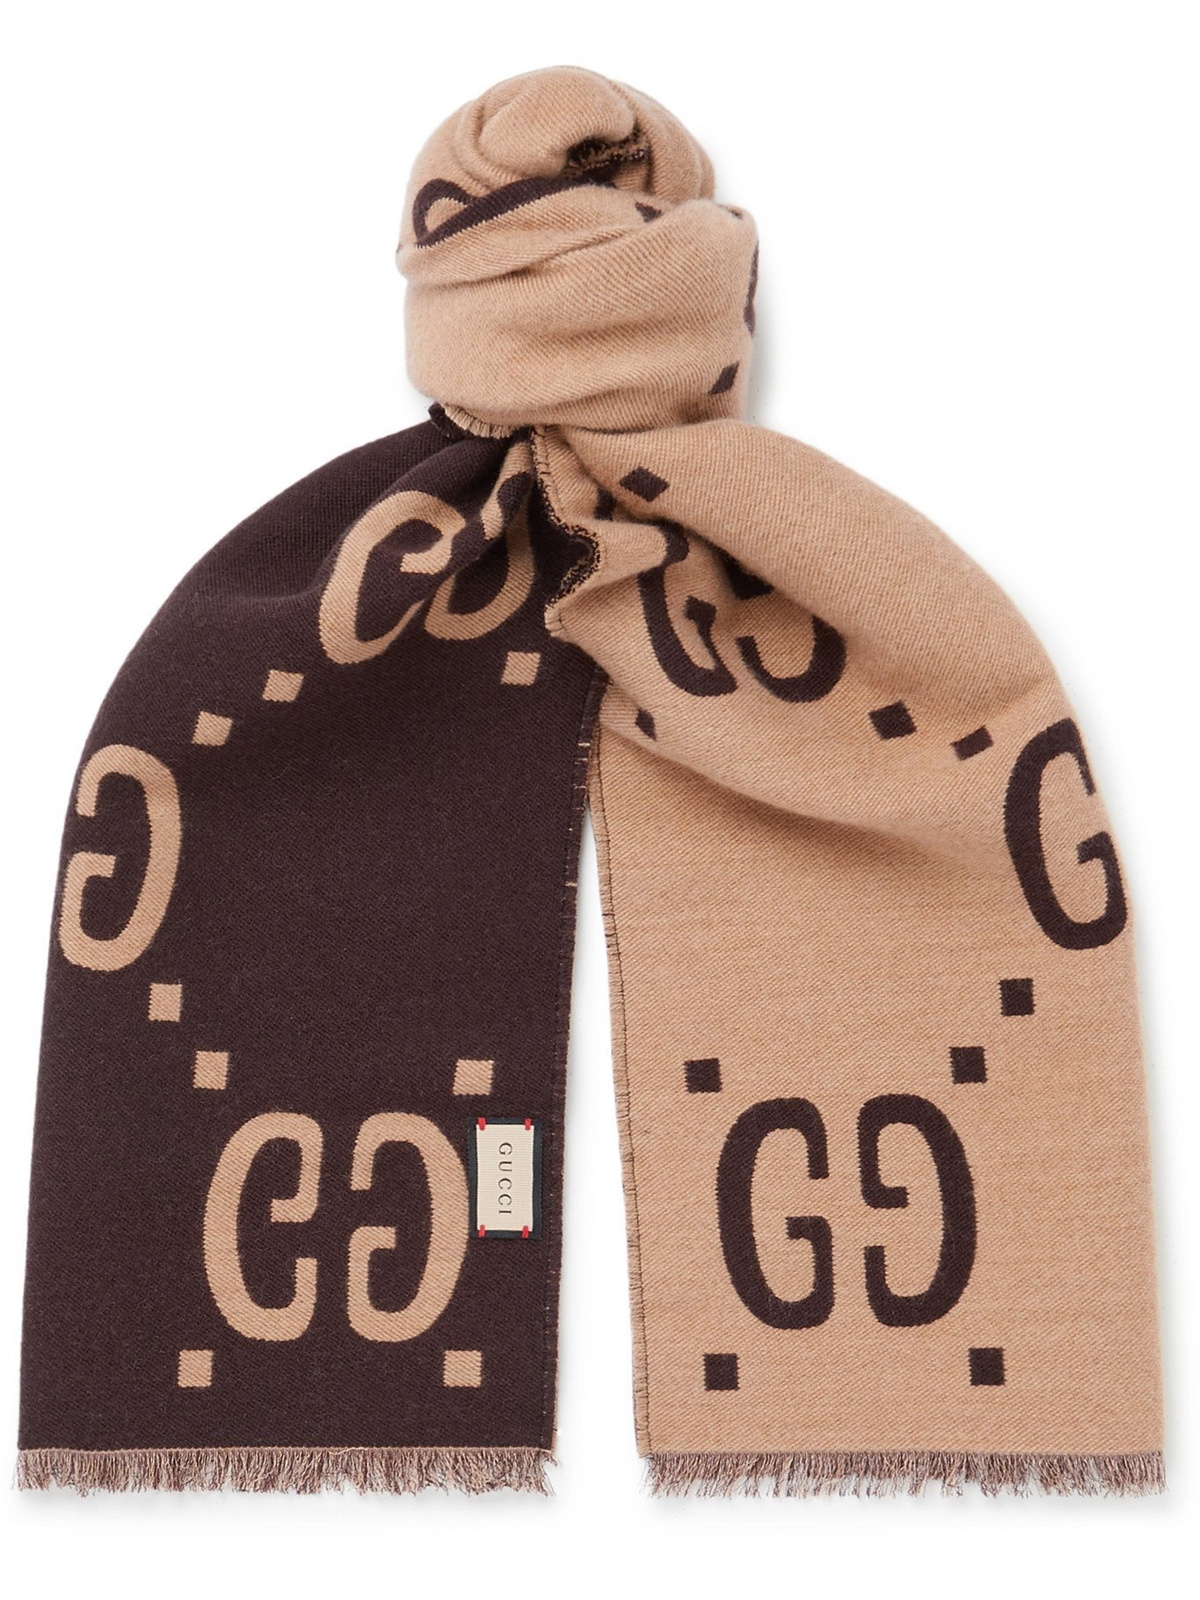 GG jacquard knit scarf with tassels in navy and brown